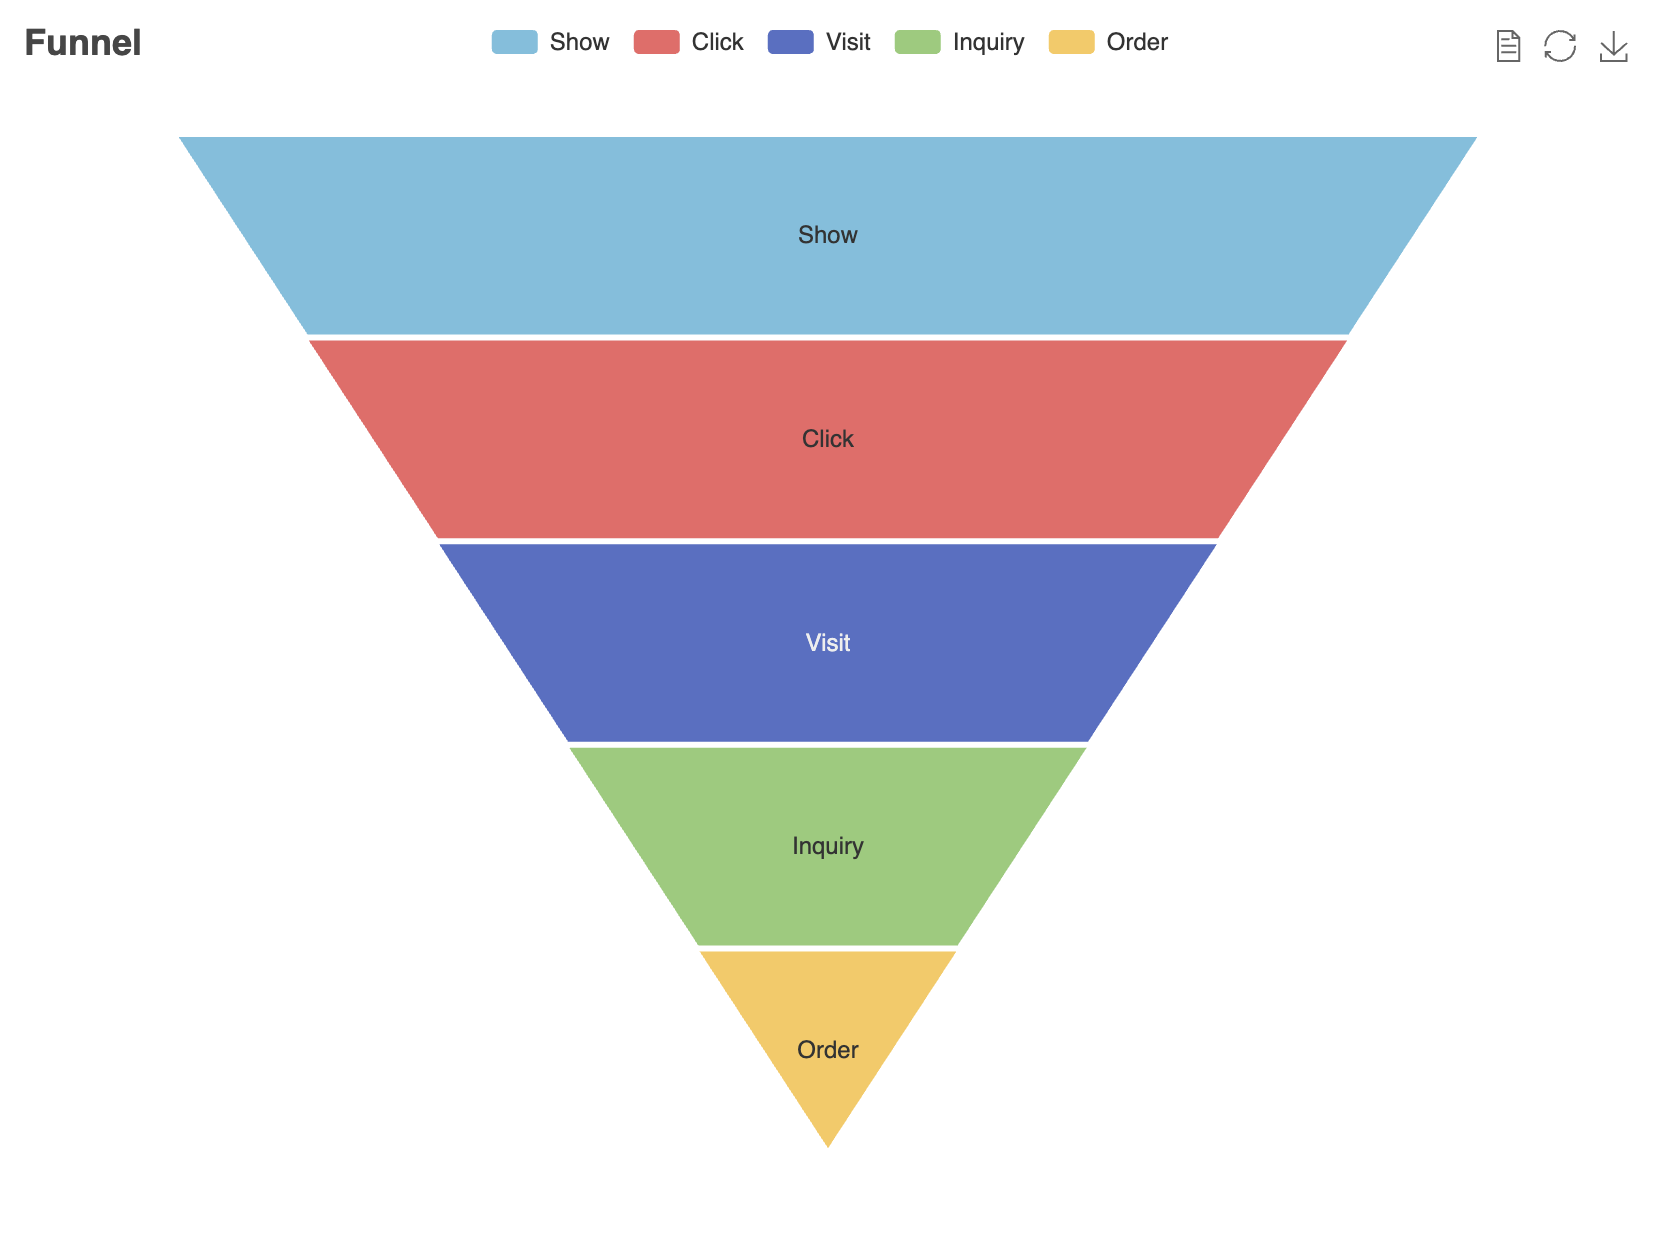 funnel_chart_example